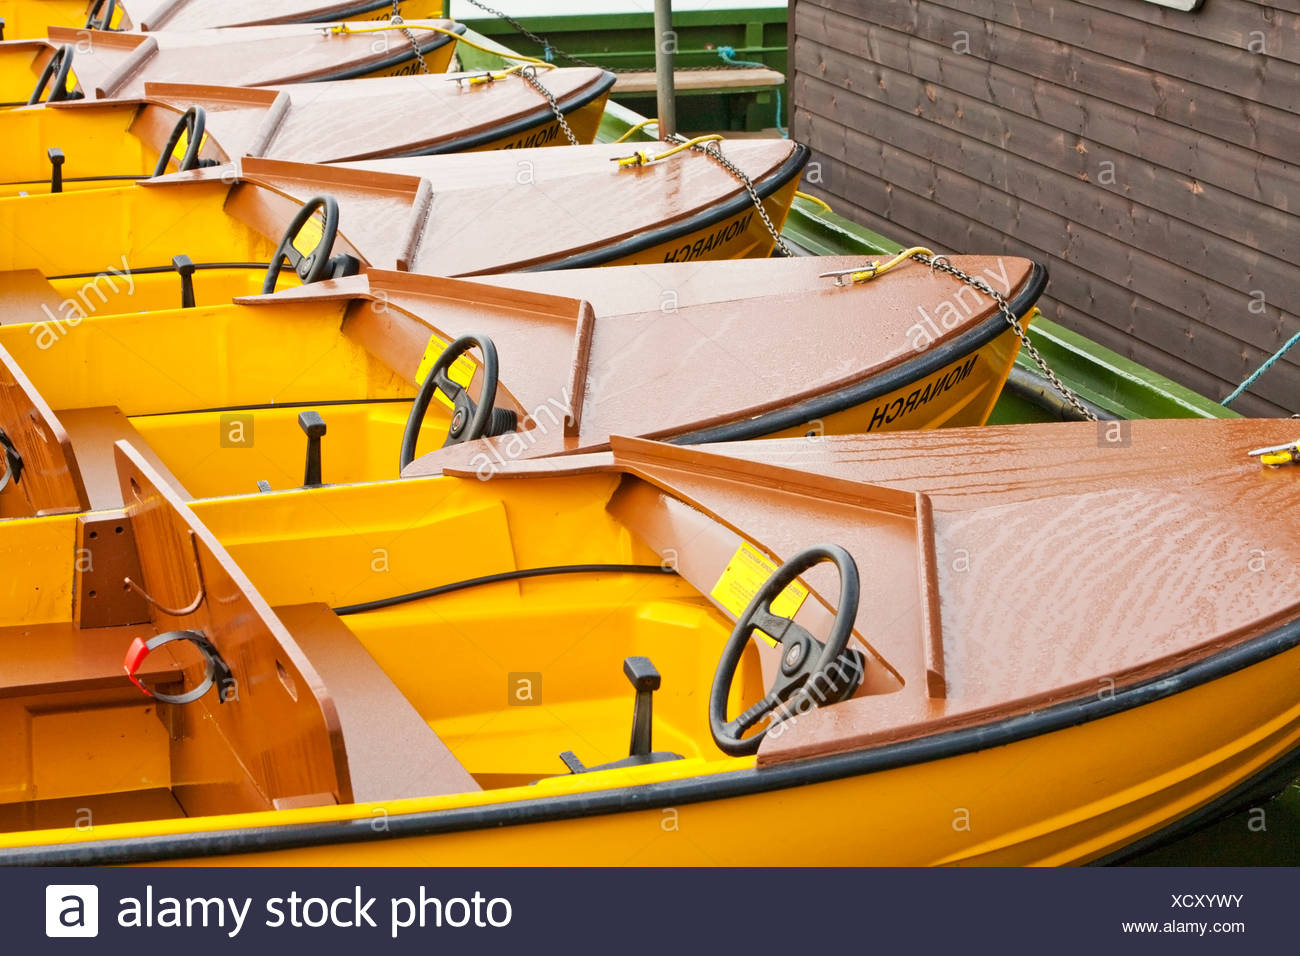 River Boat Hire Stock Photos &amp; River Boat Hire Stock ...